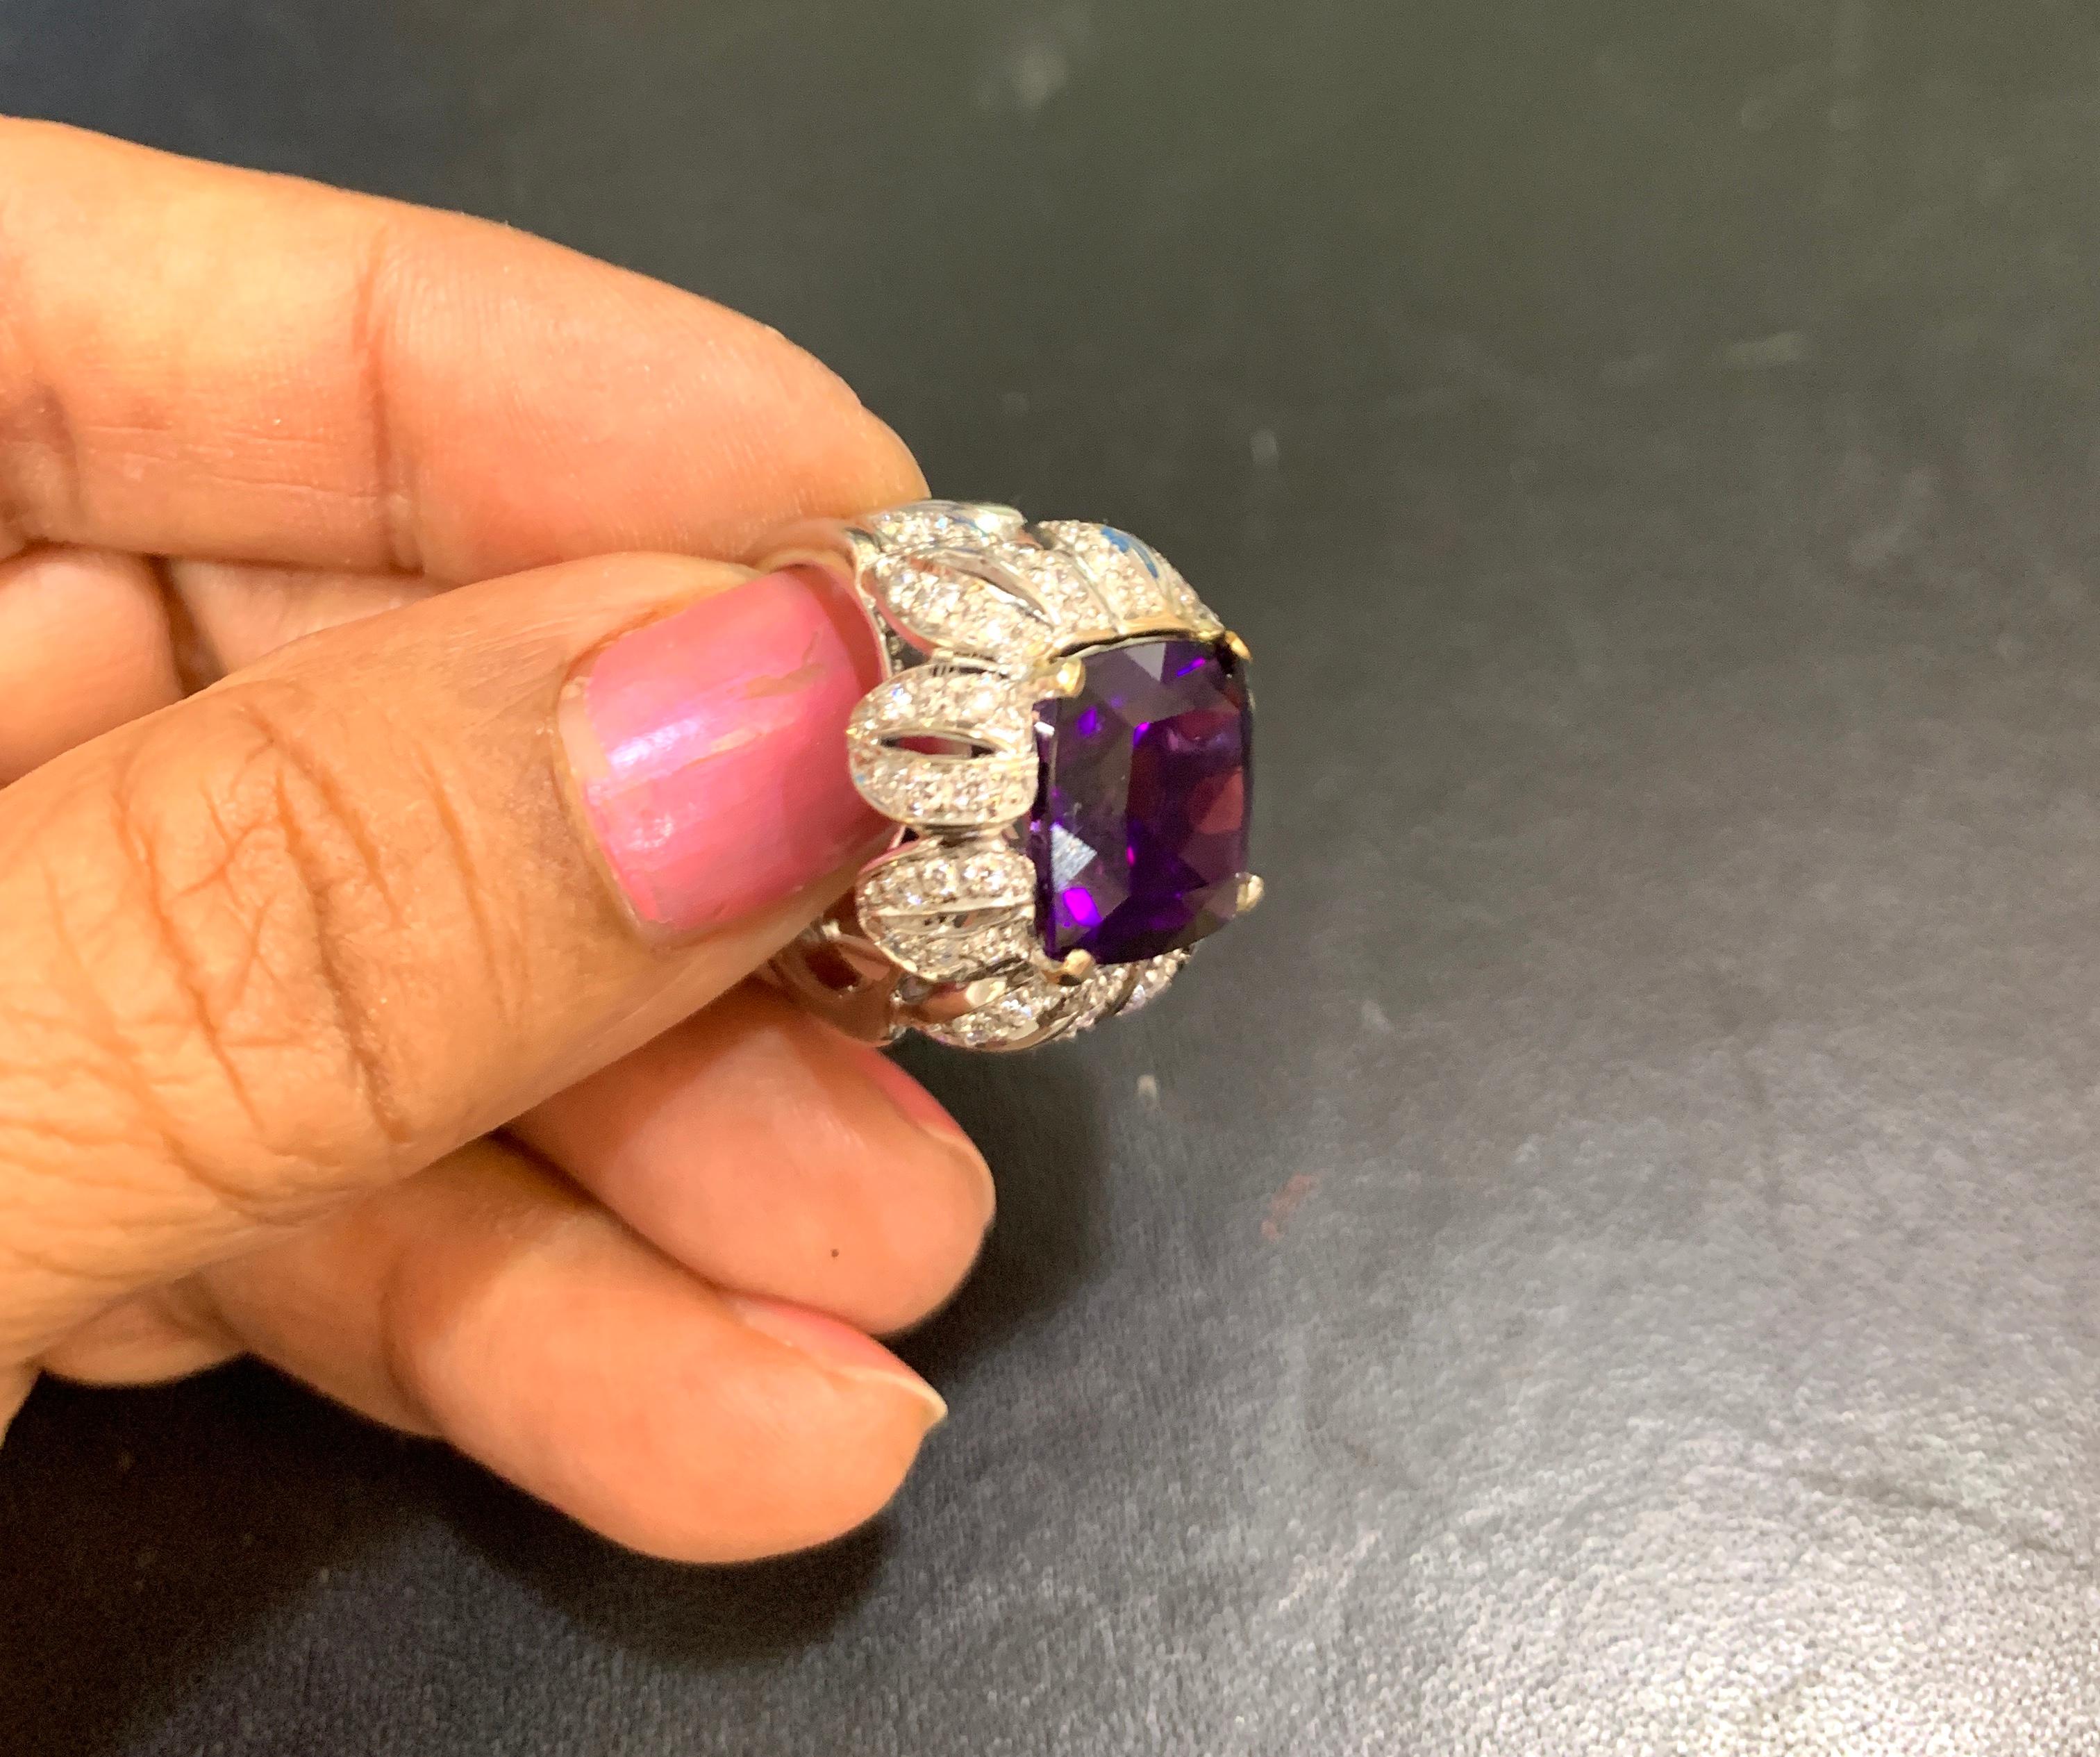 Antique Cushion Cut 6.5 Carat Amethyst And 1.5 Carat Diamond  Ring 18 Karat White Gold, 1970s, Italy For Sale